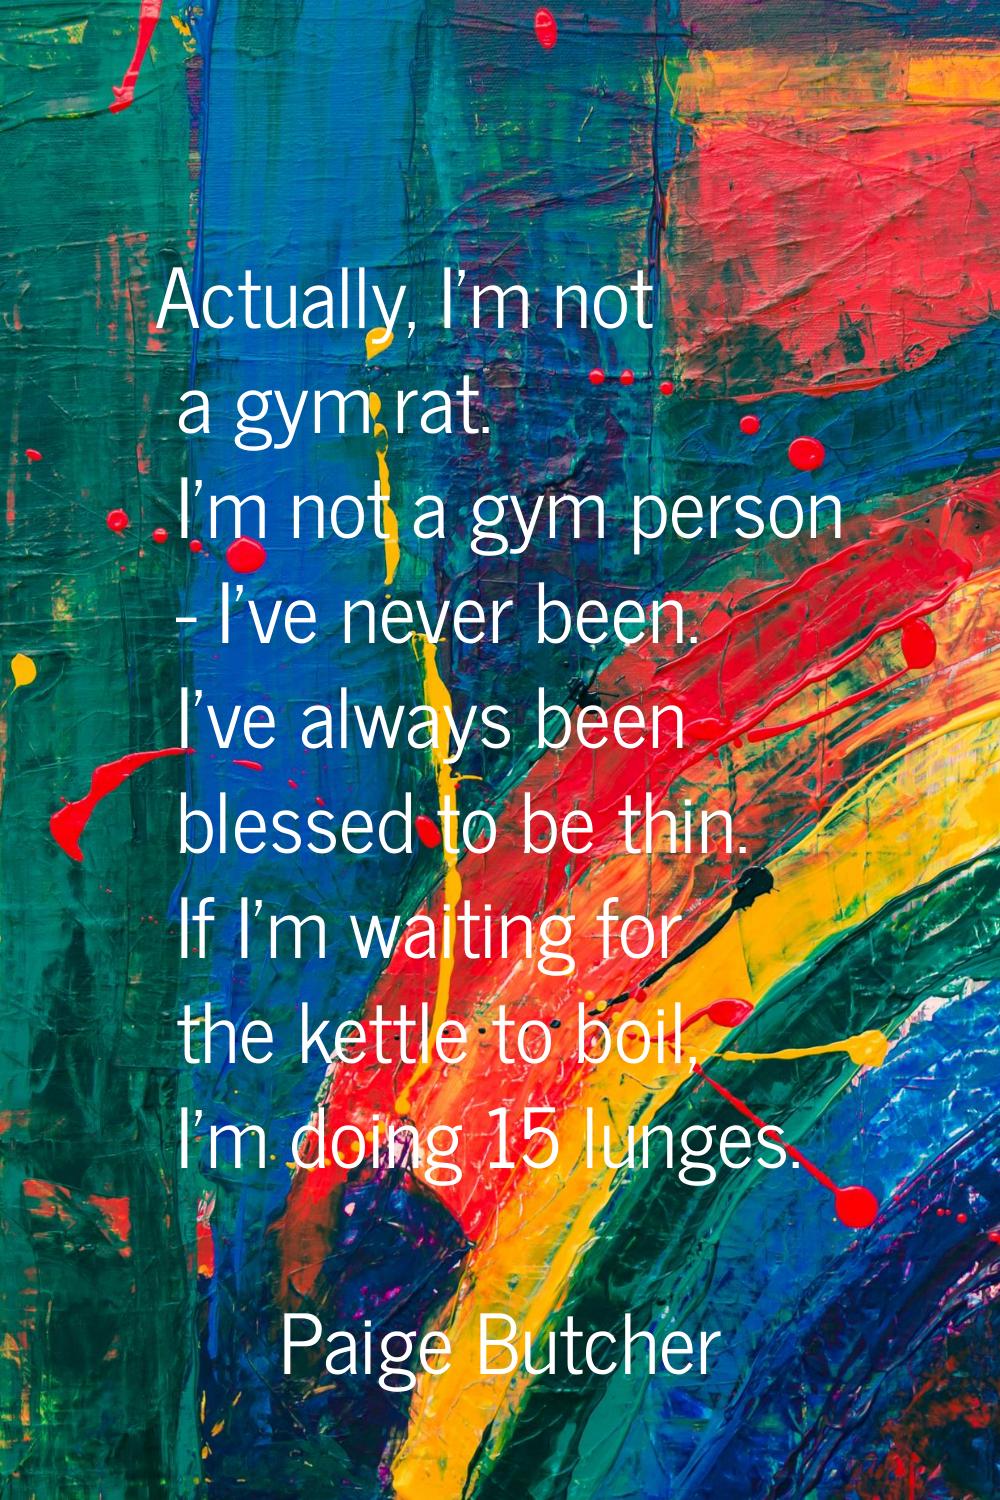 Actually, I'm not a gym rat. I'm not a gym person - I've never been. I've always been blessed to be